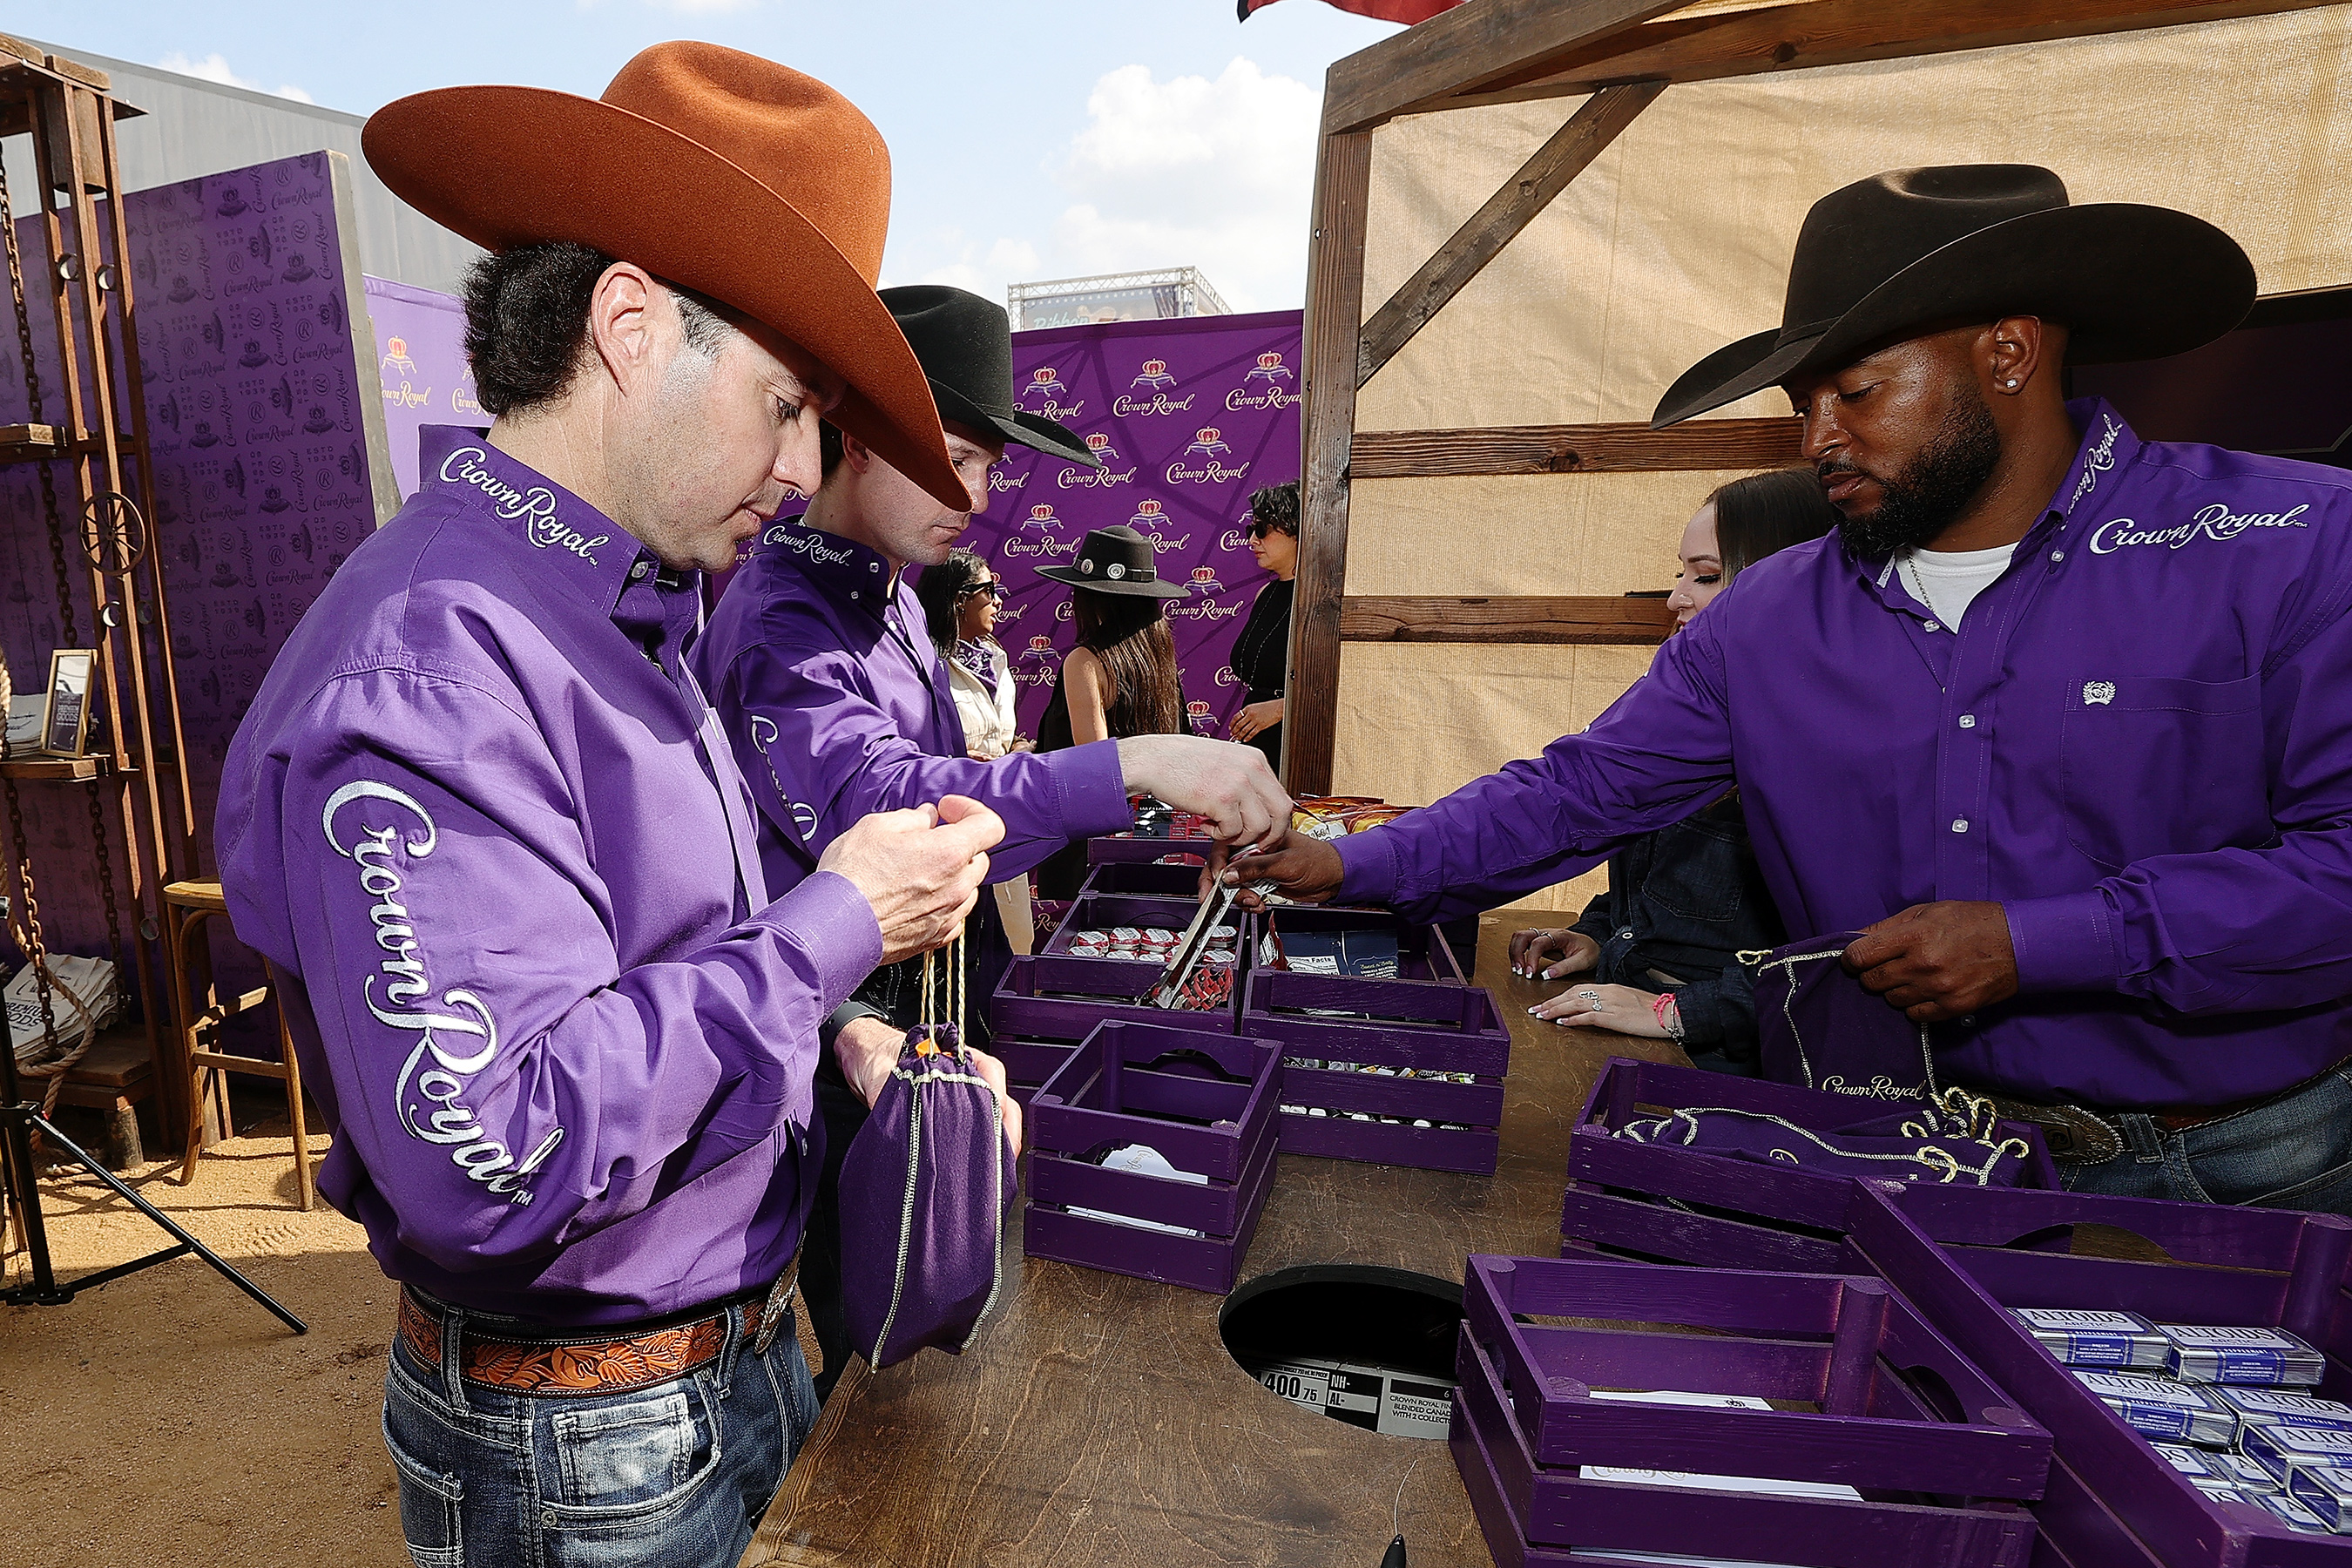 Crown Royal Royal Riders Wesley Silcox, Garrett Smith and Tory Johnson participate in the Purple Bag Project at the Crown Royal Ranch at the Houston Rodeo at NRG Park in Houston, Texas. (Photo by Bob Levey/Getty Images for Crown Royal)